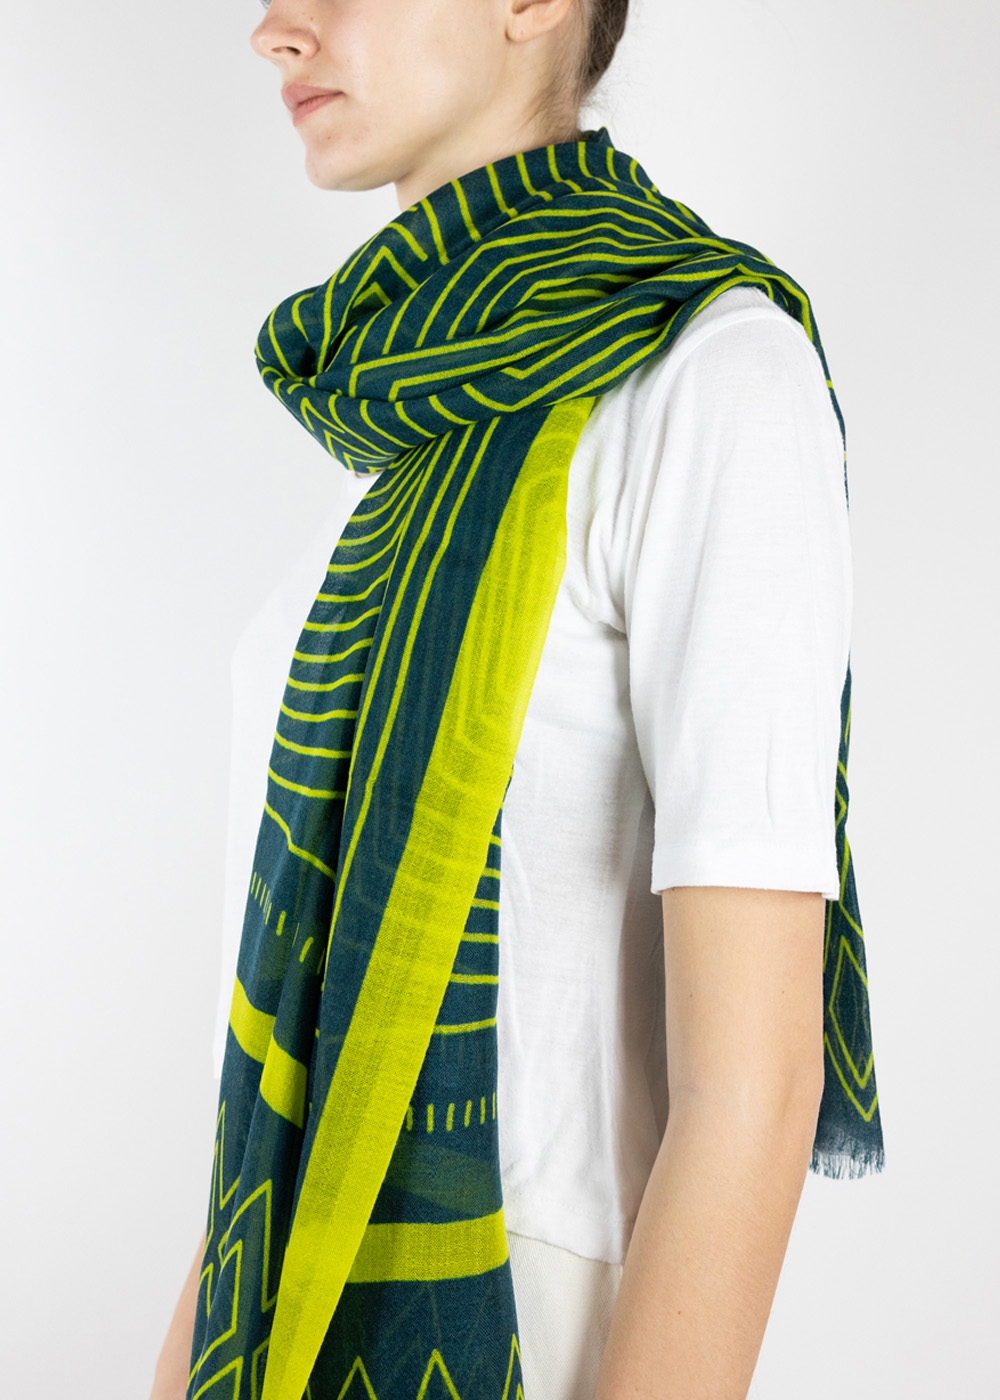 Cashmere Stole Stylised Drawings Teal and Yellow | Cashmere Scarves ...